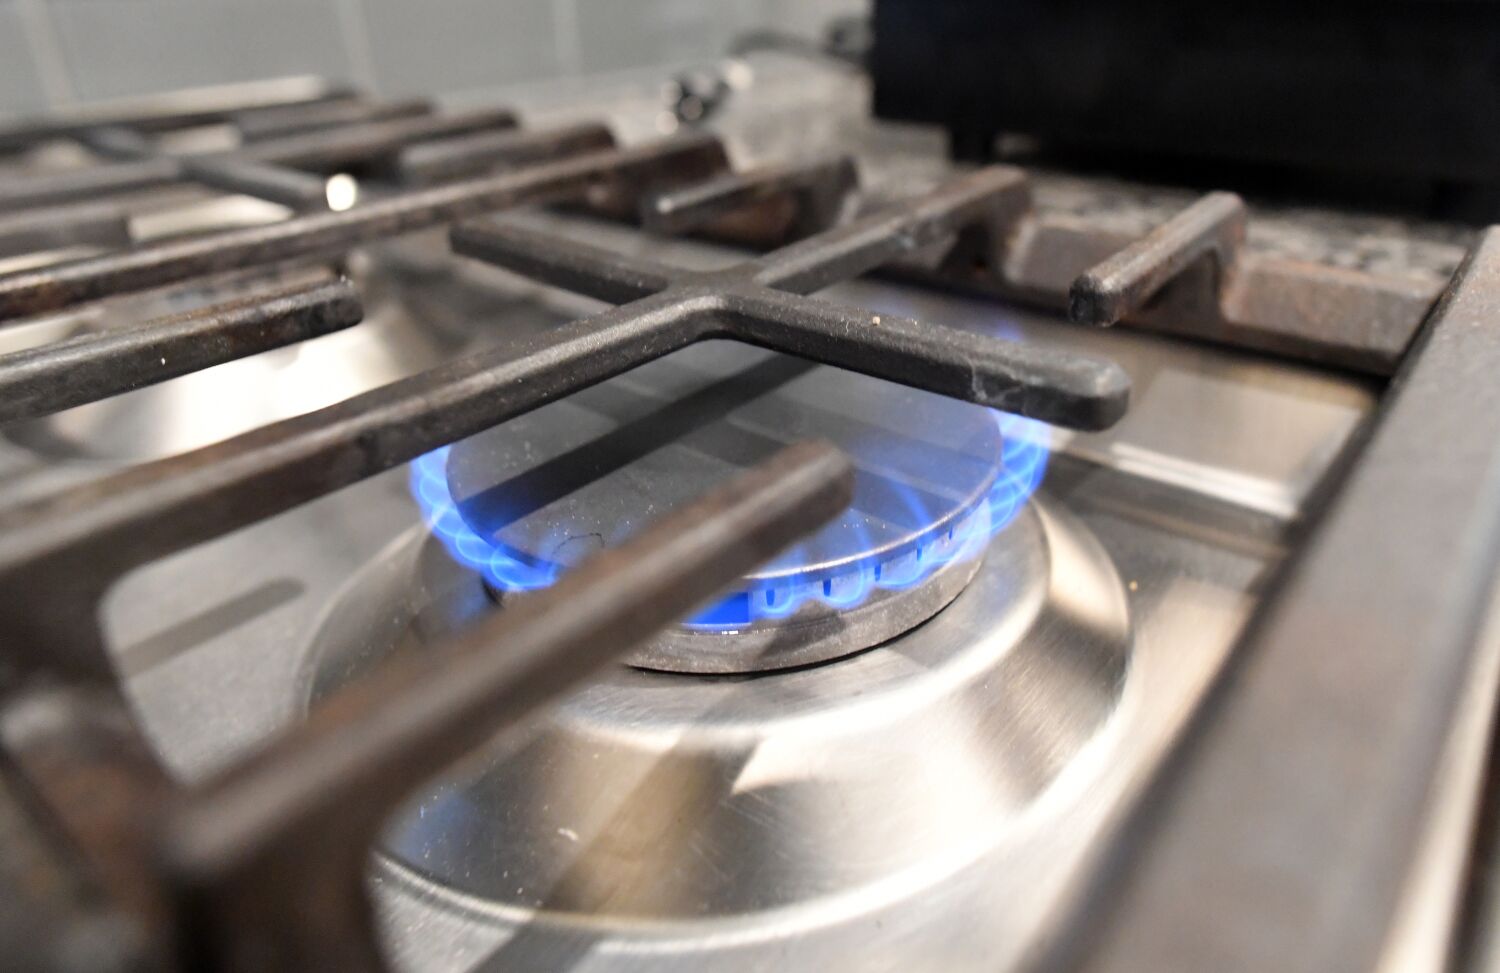 Cooking with a gas stove may be as bad as breathing secondhand cigarette smoke, study finds